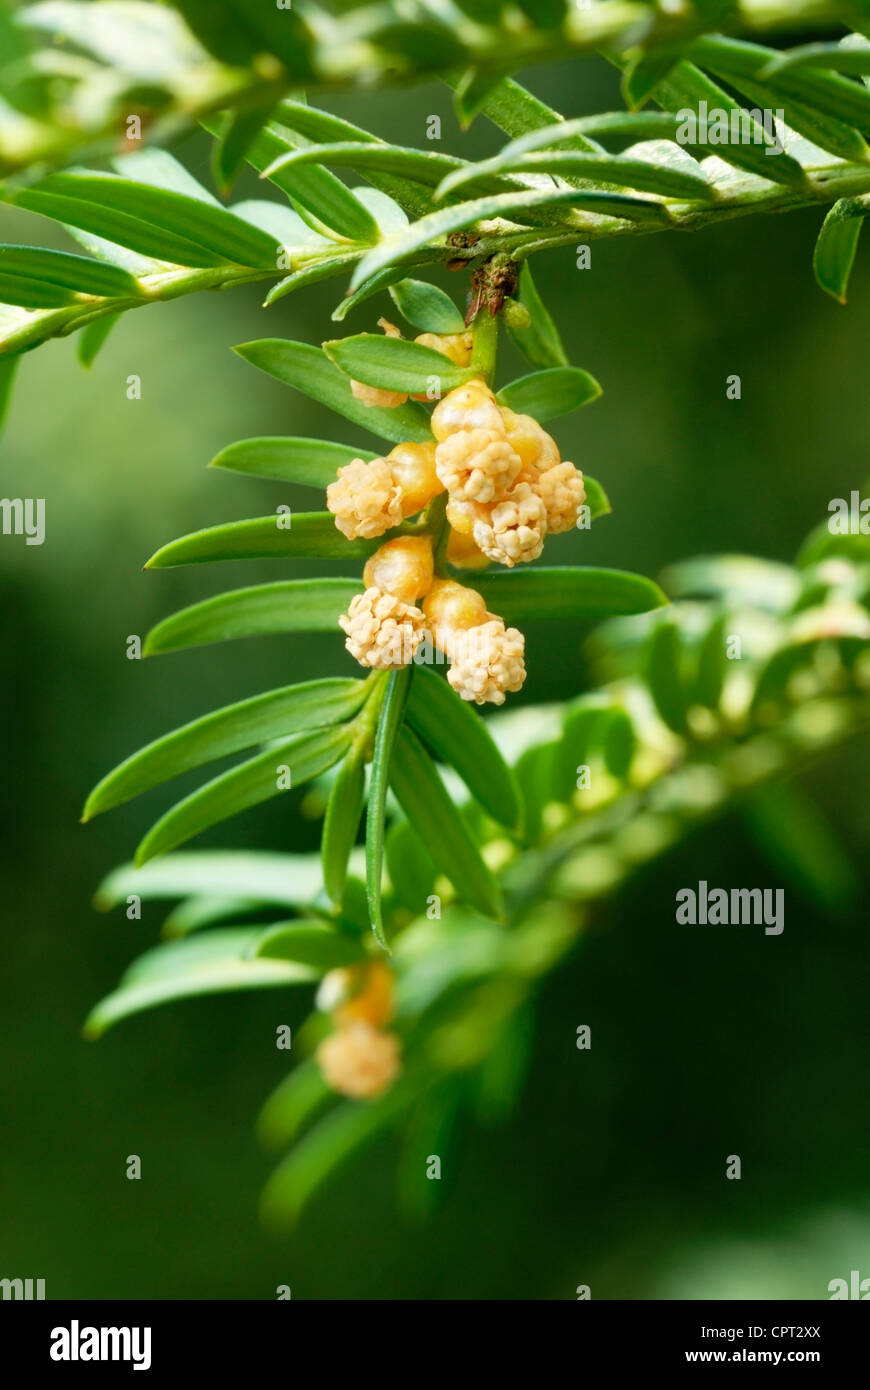 Taxus baccata, male flowers of the Yew tree, Wales, UK Stock Photo